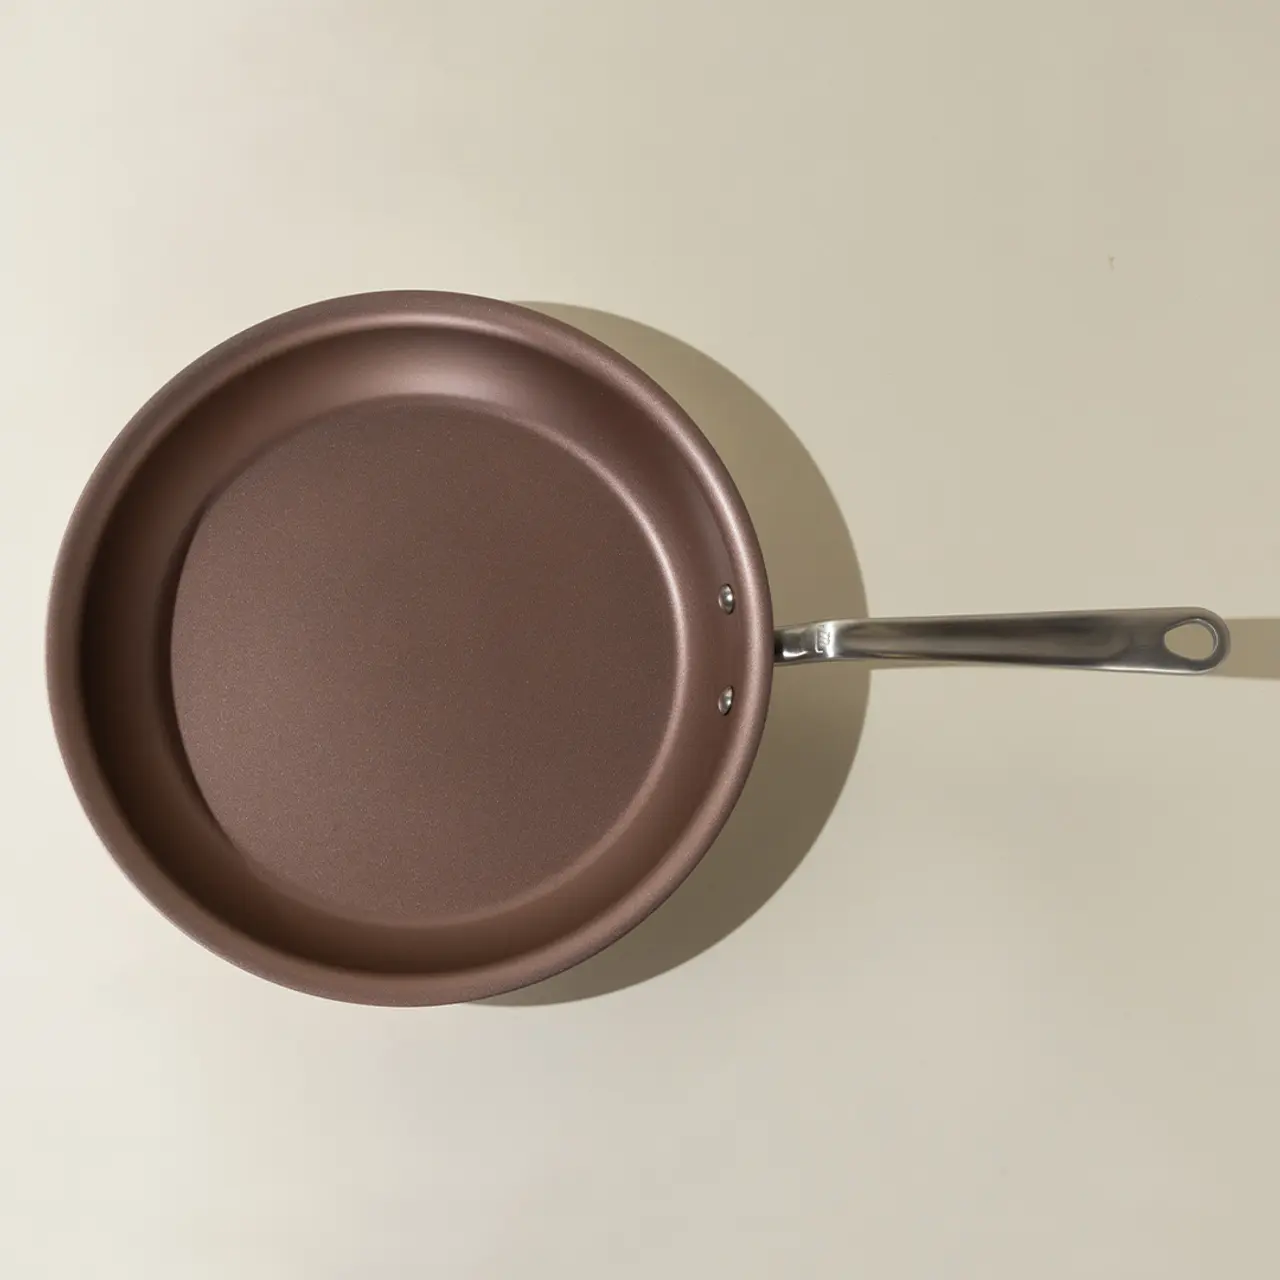 A brown non-stick frying pan with a silver handle is viewed from above against a neutral background.